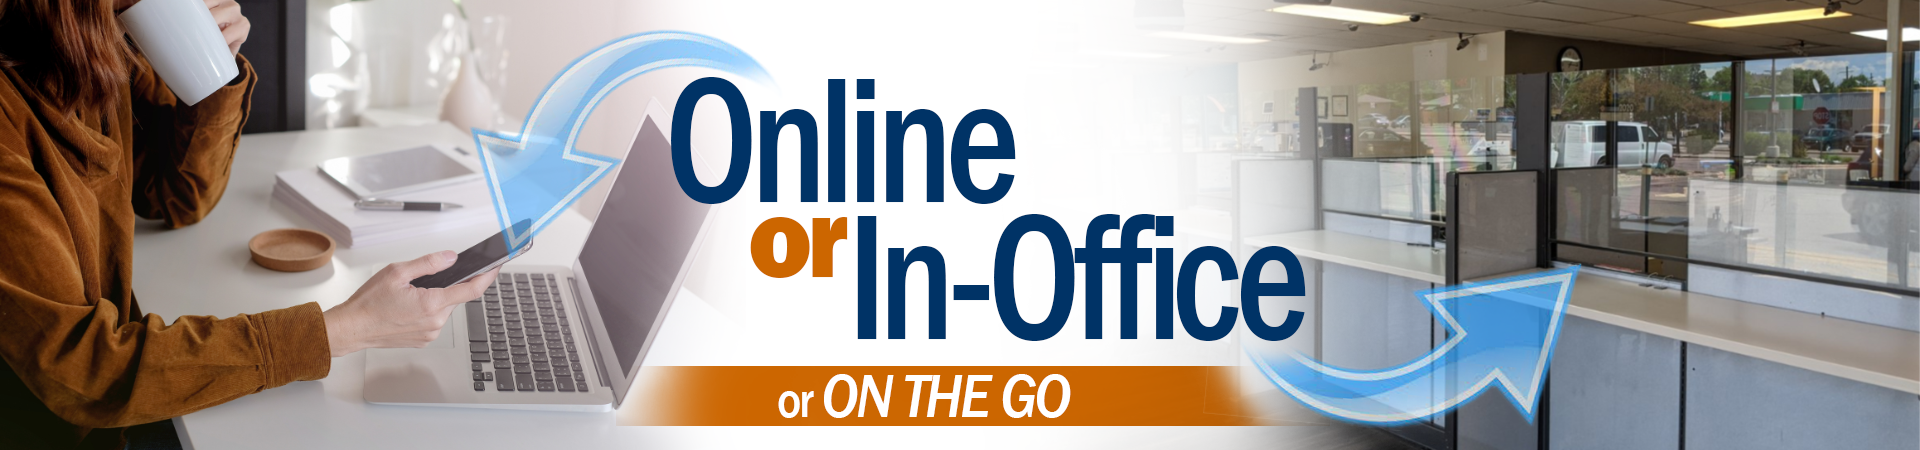 Online or In Office Or On the Go banner where left side has a person drinking coffee while on their mobile phone at a desk with a laptop. The text is centered. The right side is the inside of a CO DMV office.